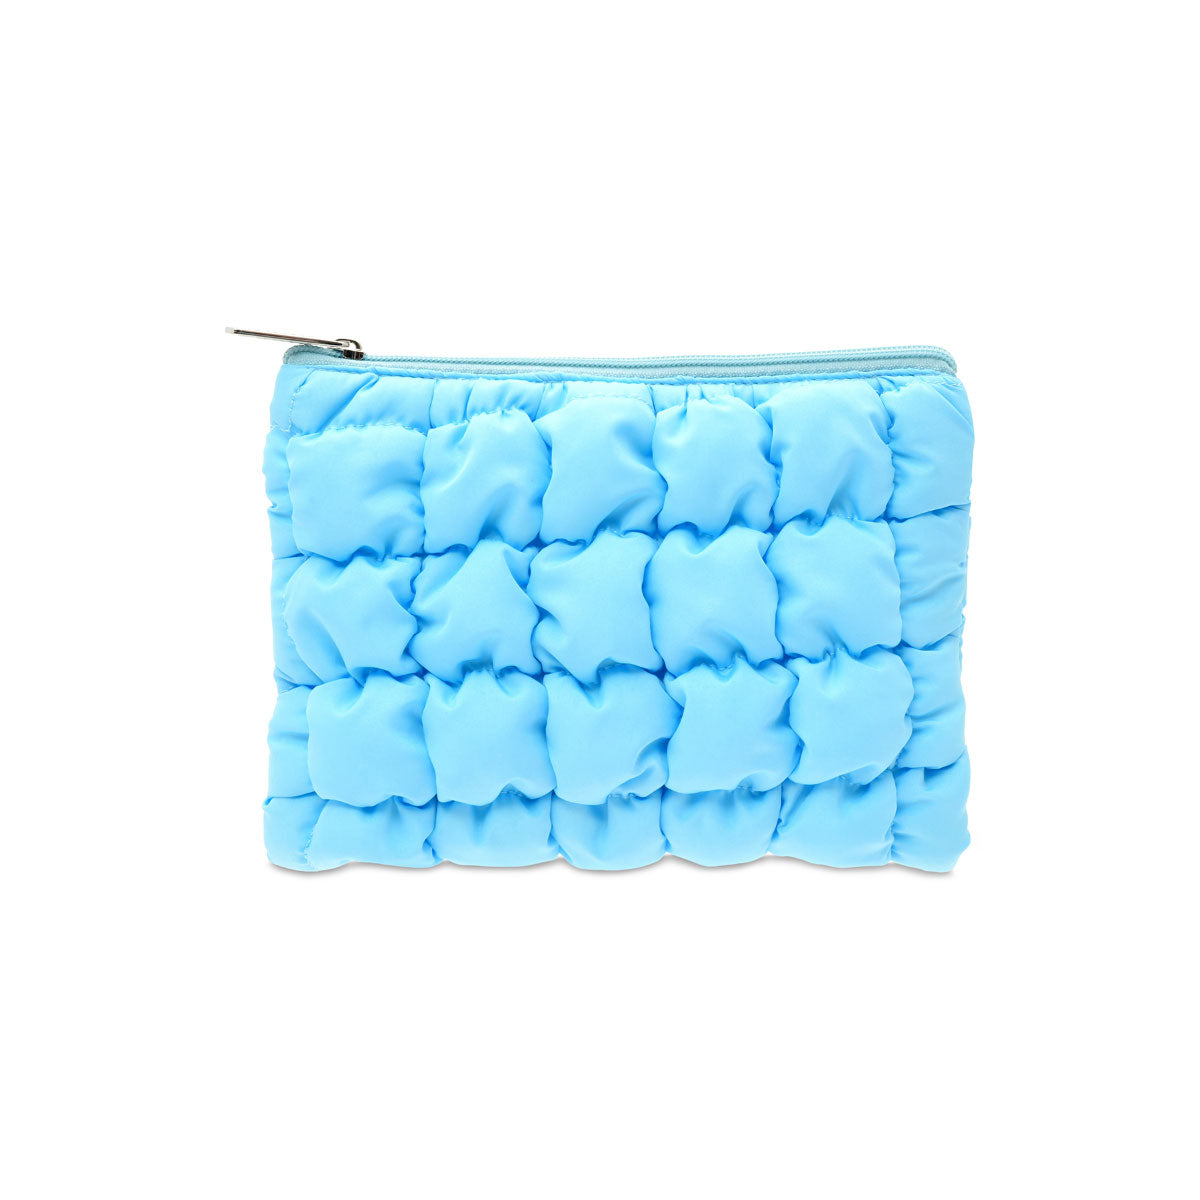 Puffy Pouch Cosmetics Bag - Blue